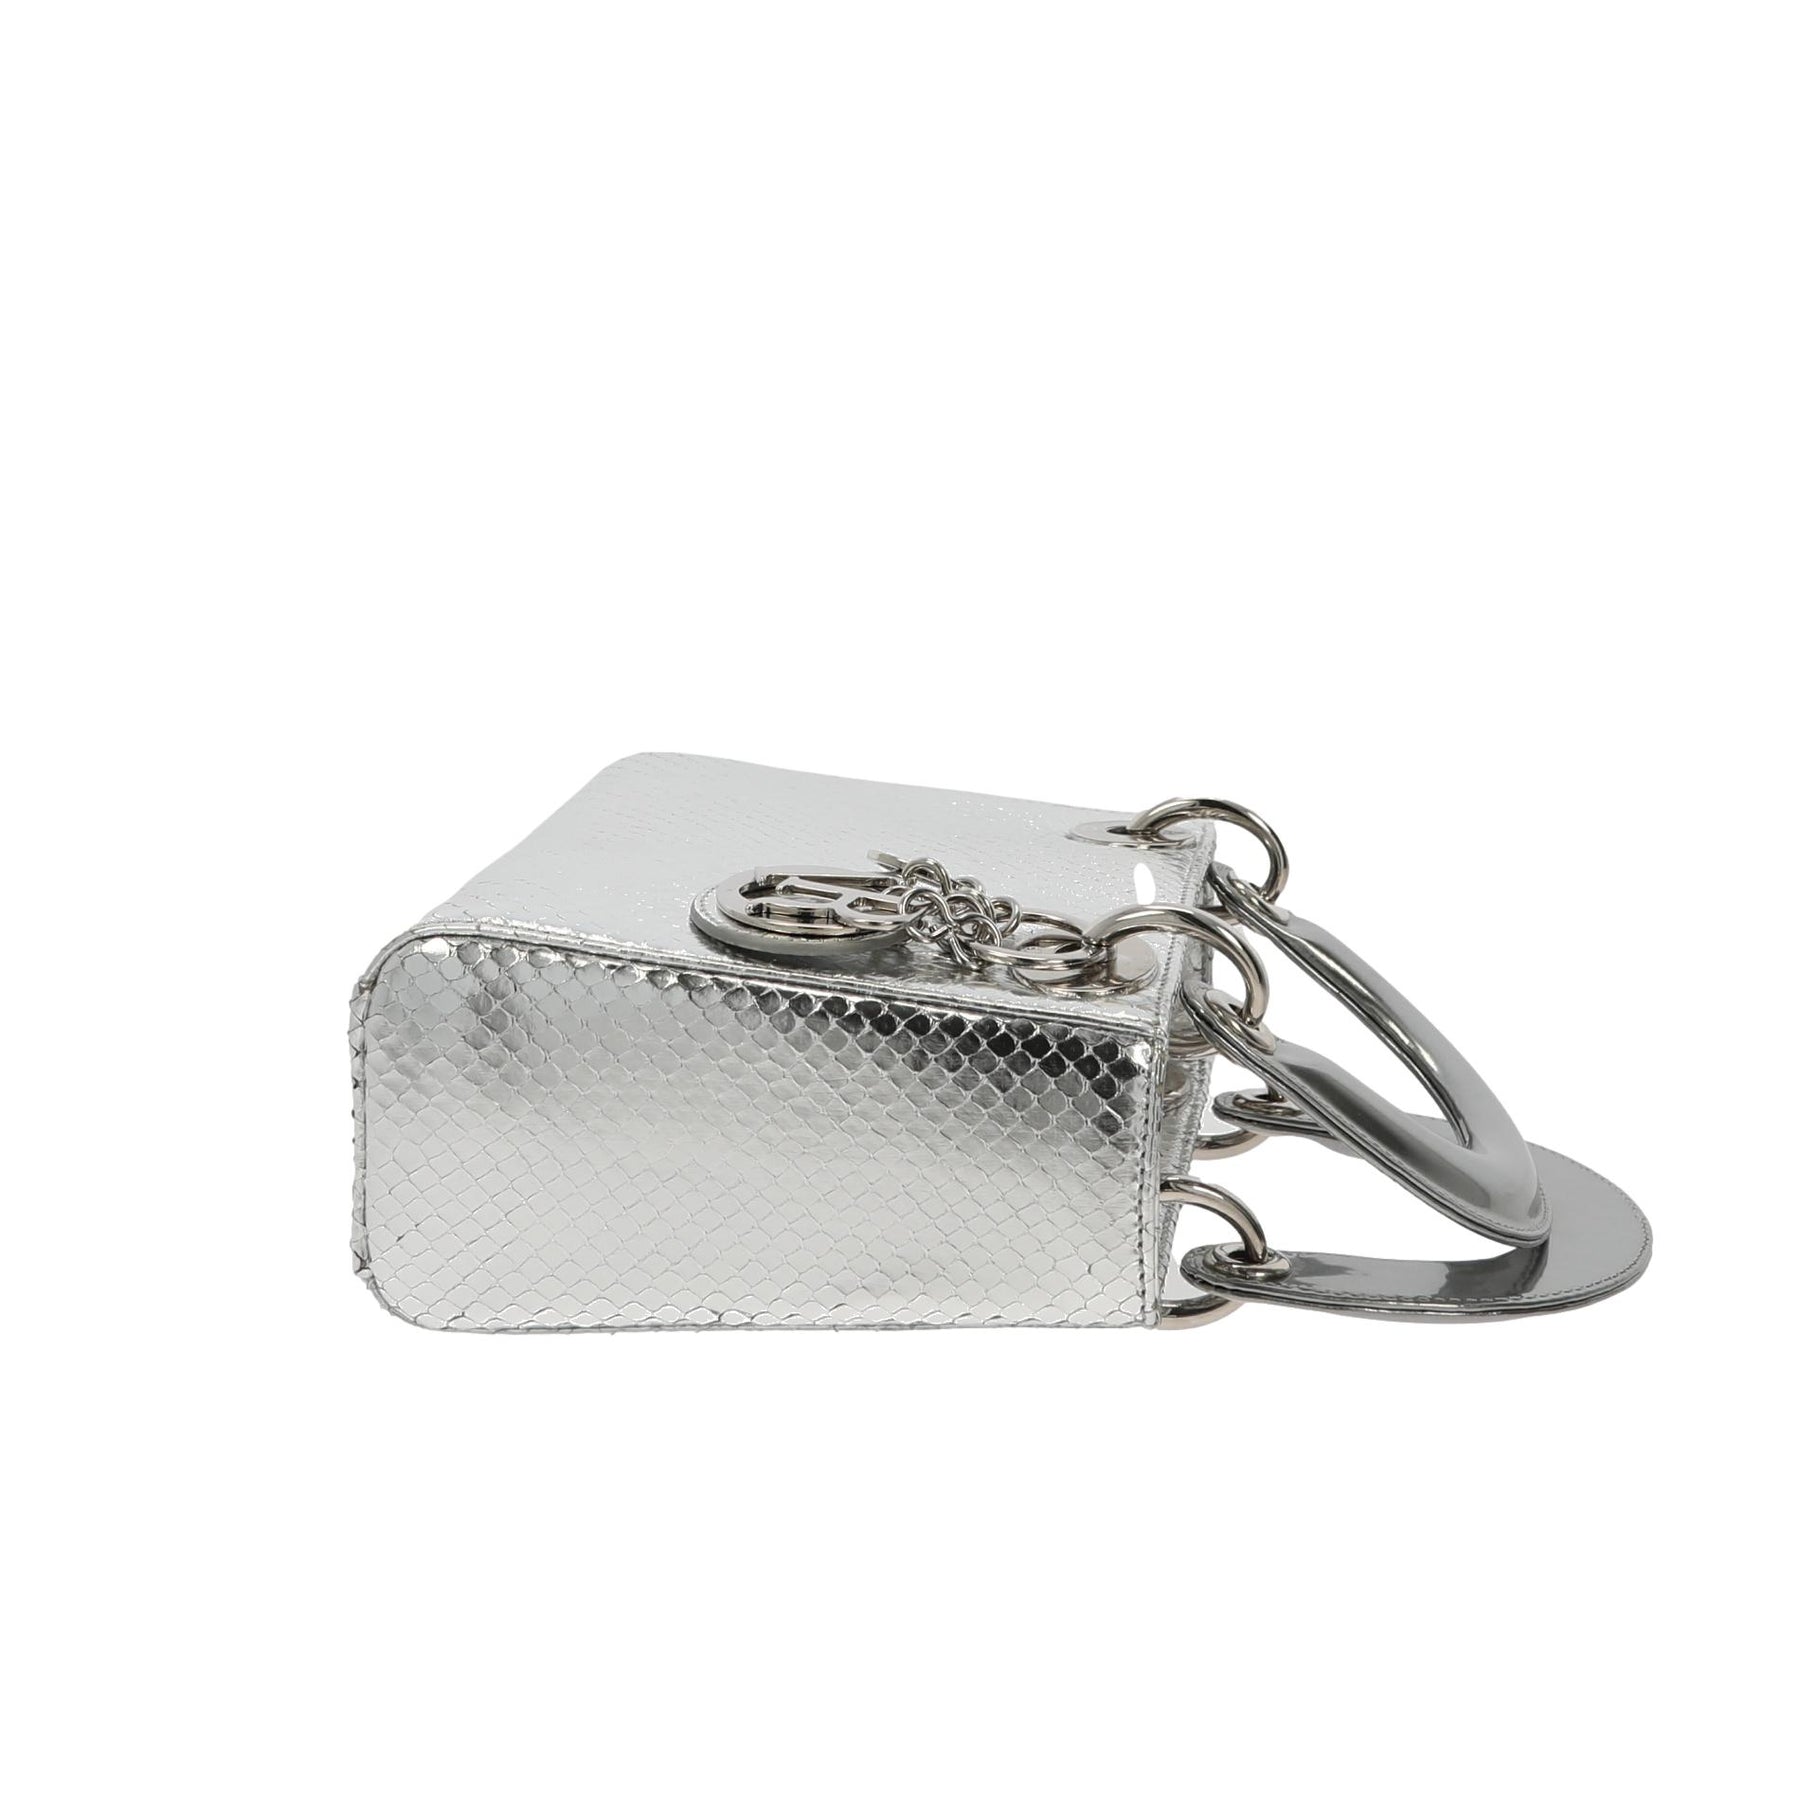 Christian Dior Mini Lady Dior in silver python leather – Fancy Lux